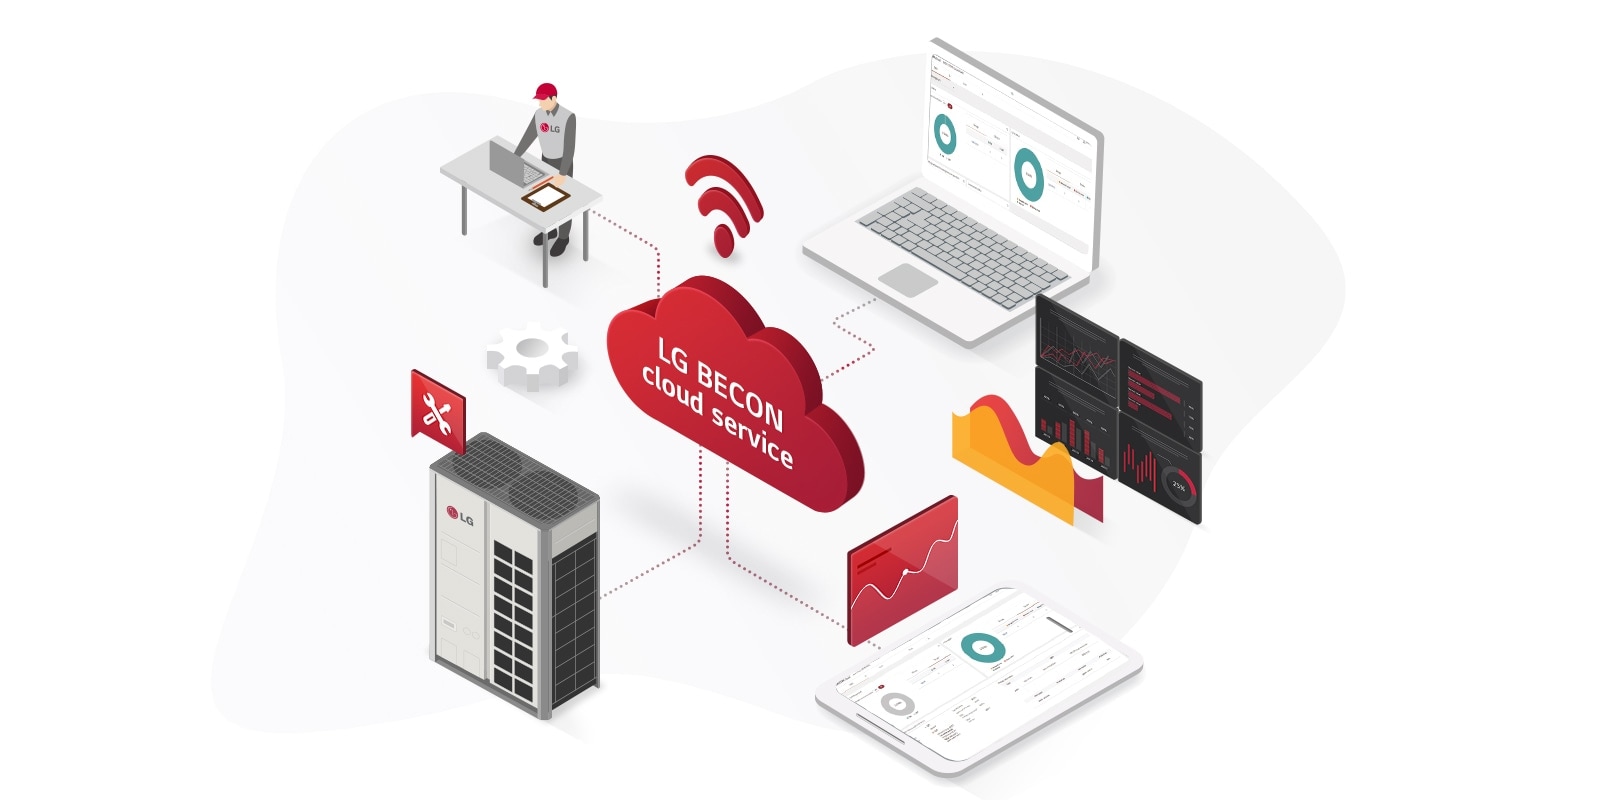 Connected by gray lines, LG BECON Connect API and 3rd Party Service exchange data via commercial and residential devices, merging into end-users.  